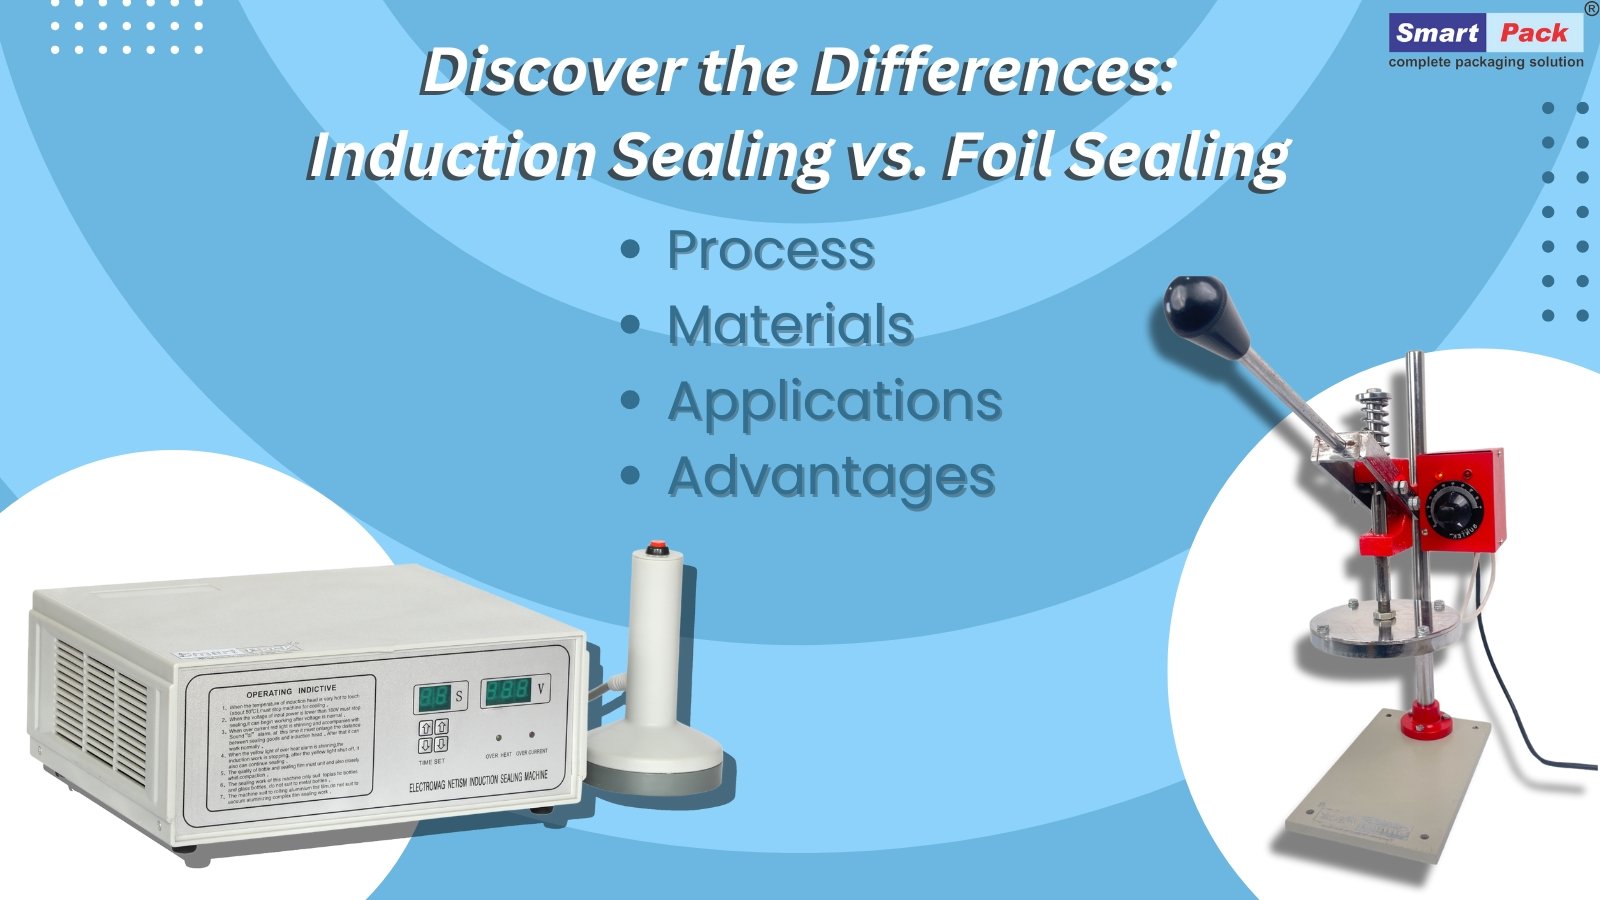 Discover the Differences: Induction Sealing vs. Foil Sealing